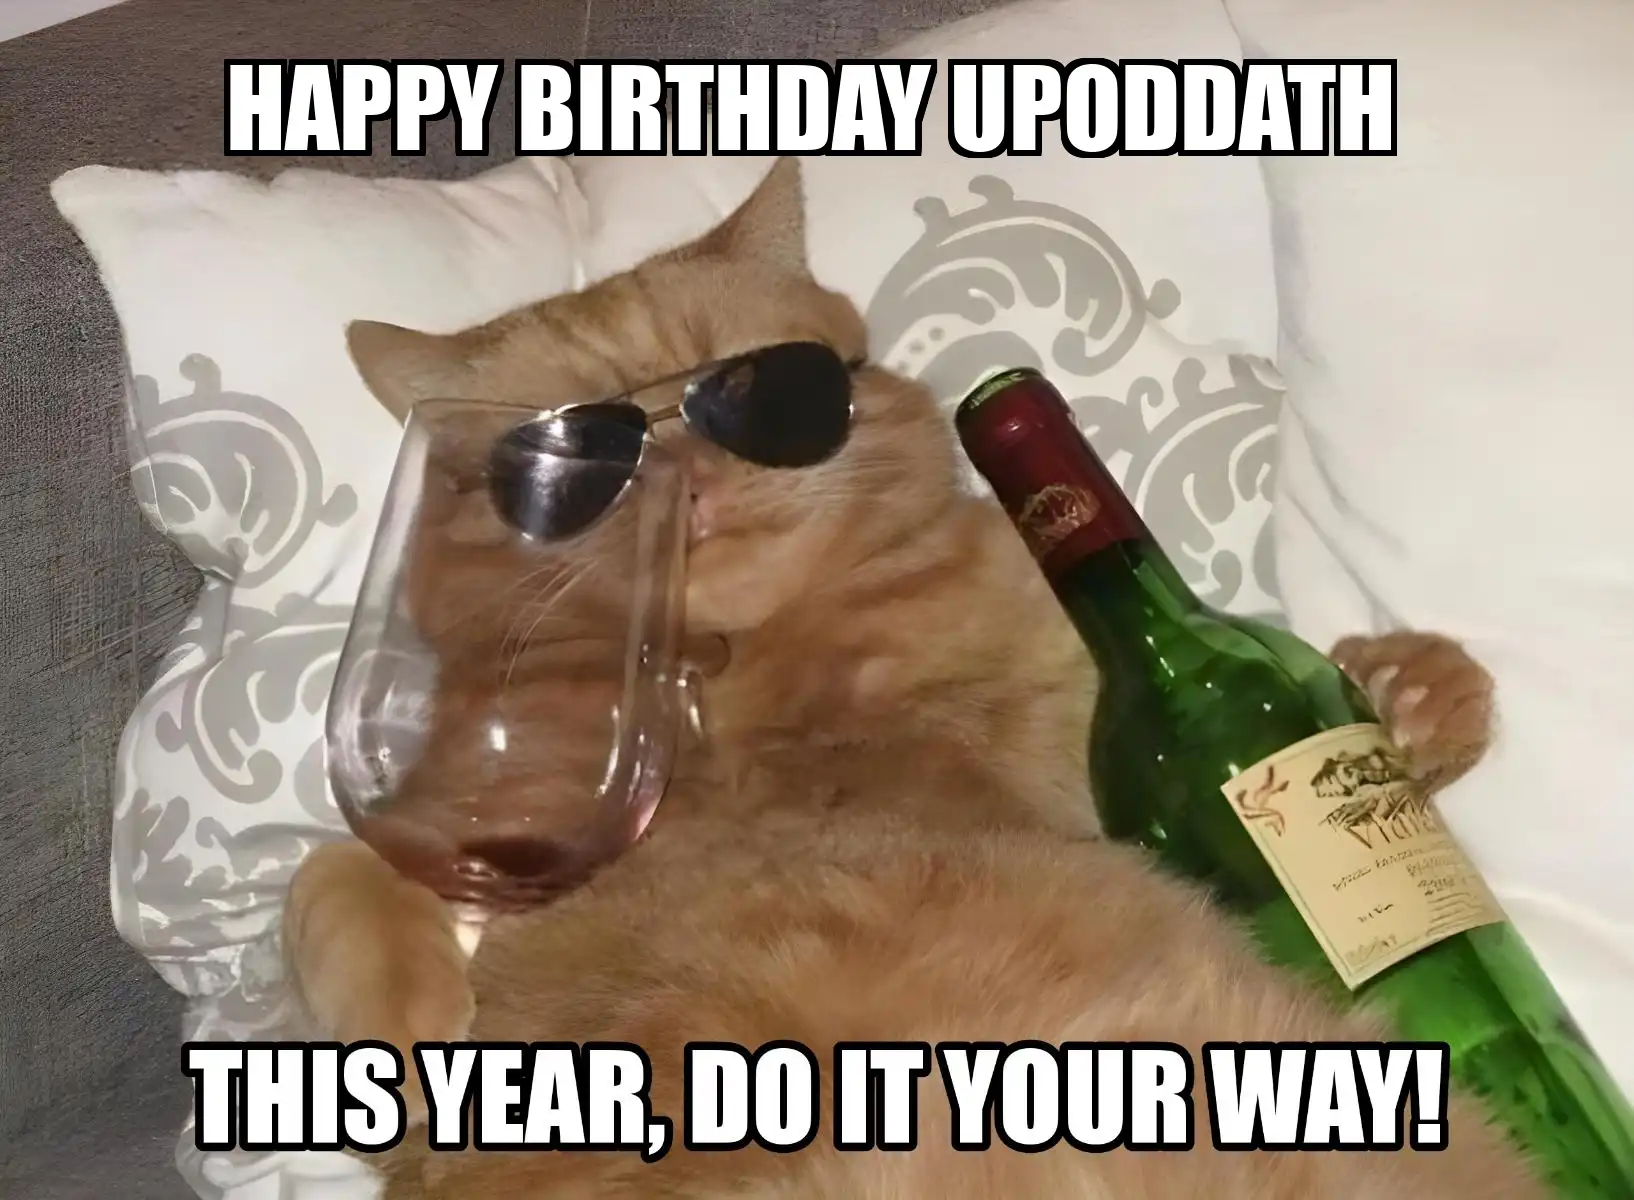 Happy Birthday Upoddath This Year Do It Your Way Meme